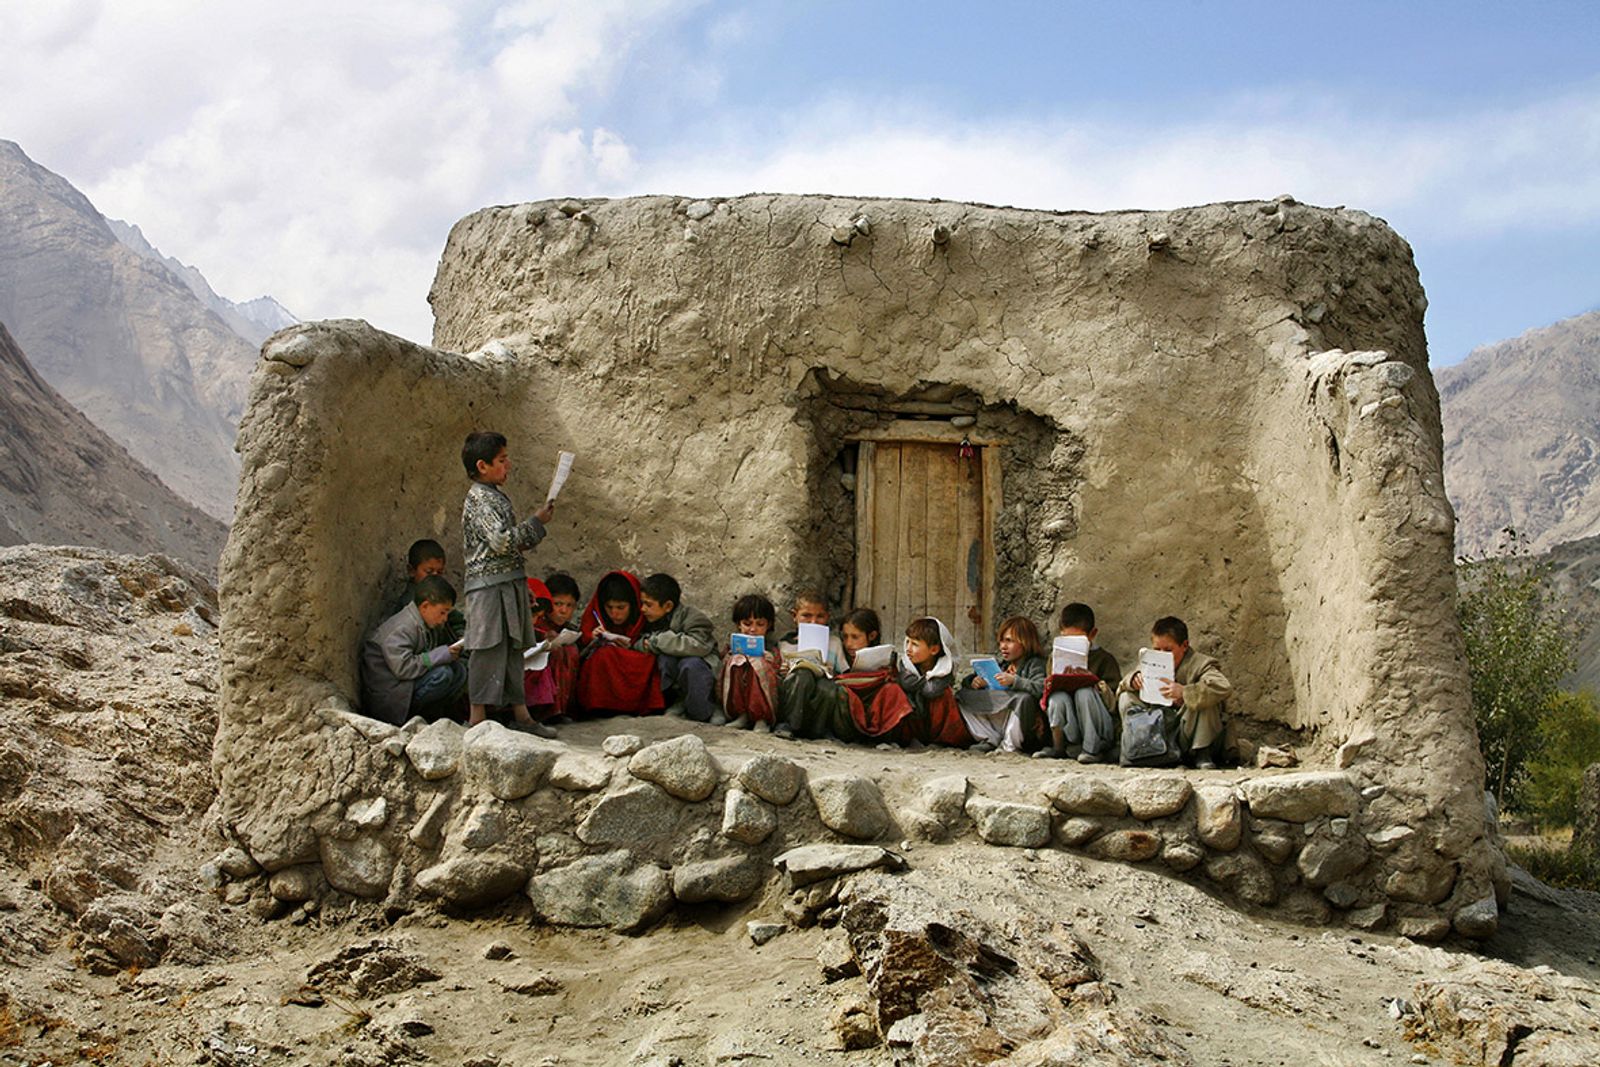 © Paula Bronstein, from the series, Afghanistan: Between Hope and Fear